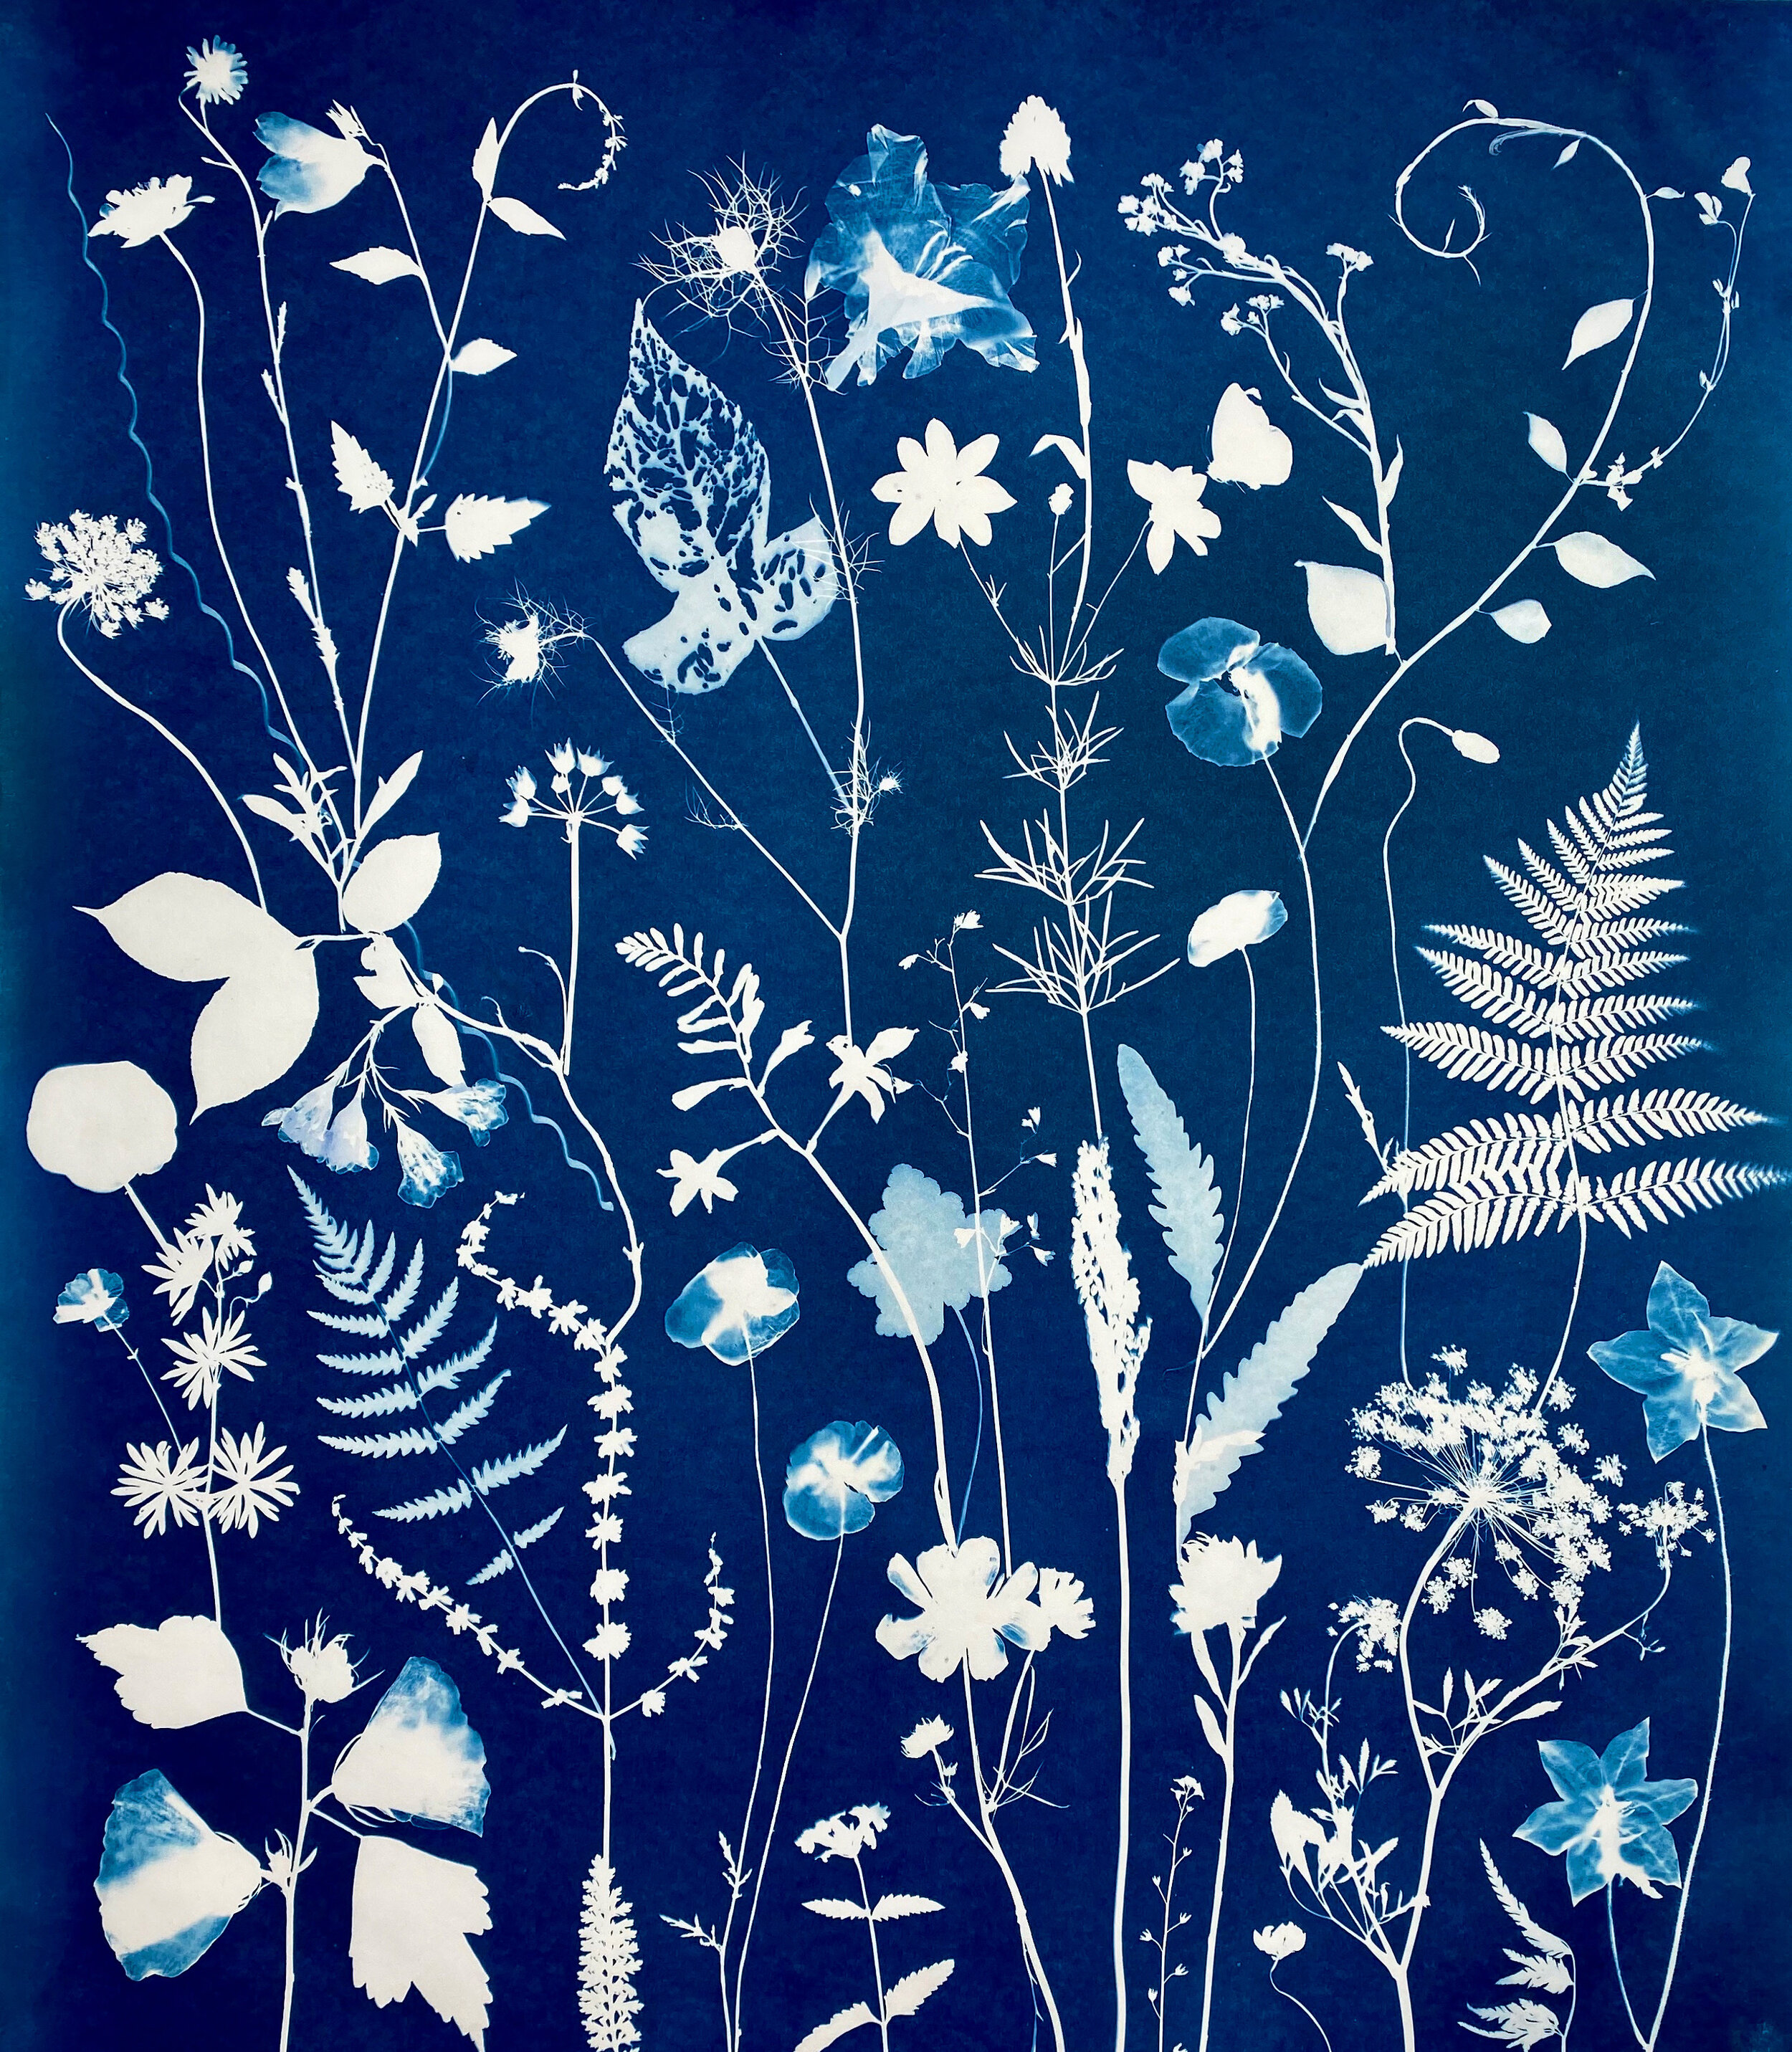 Cyanotype (Poppies, Cosmos, Rose of Sharon, Ferns, Queen Anne’s Lace, etc)